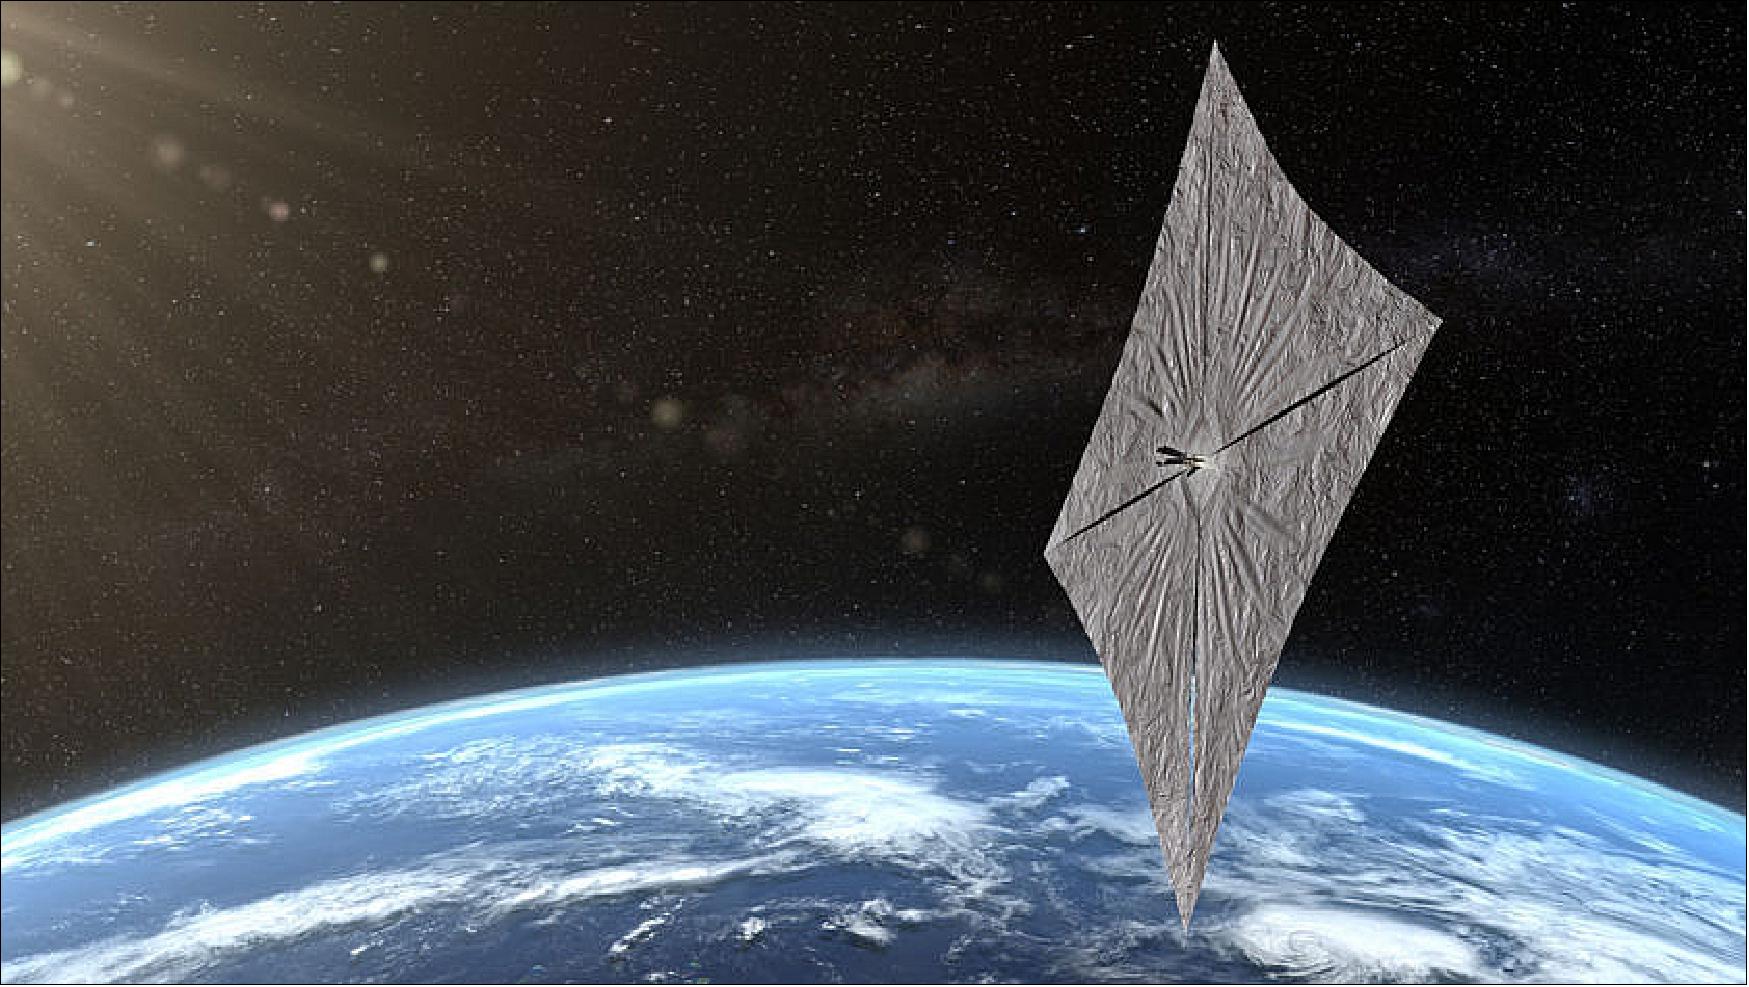 Figure 5: The deployed LightSail-2 spacecraft (image credit: Josh Spradling / The Planetary Society)